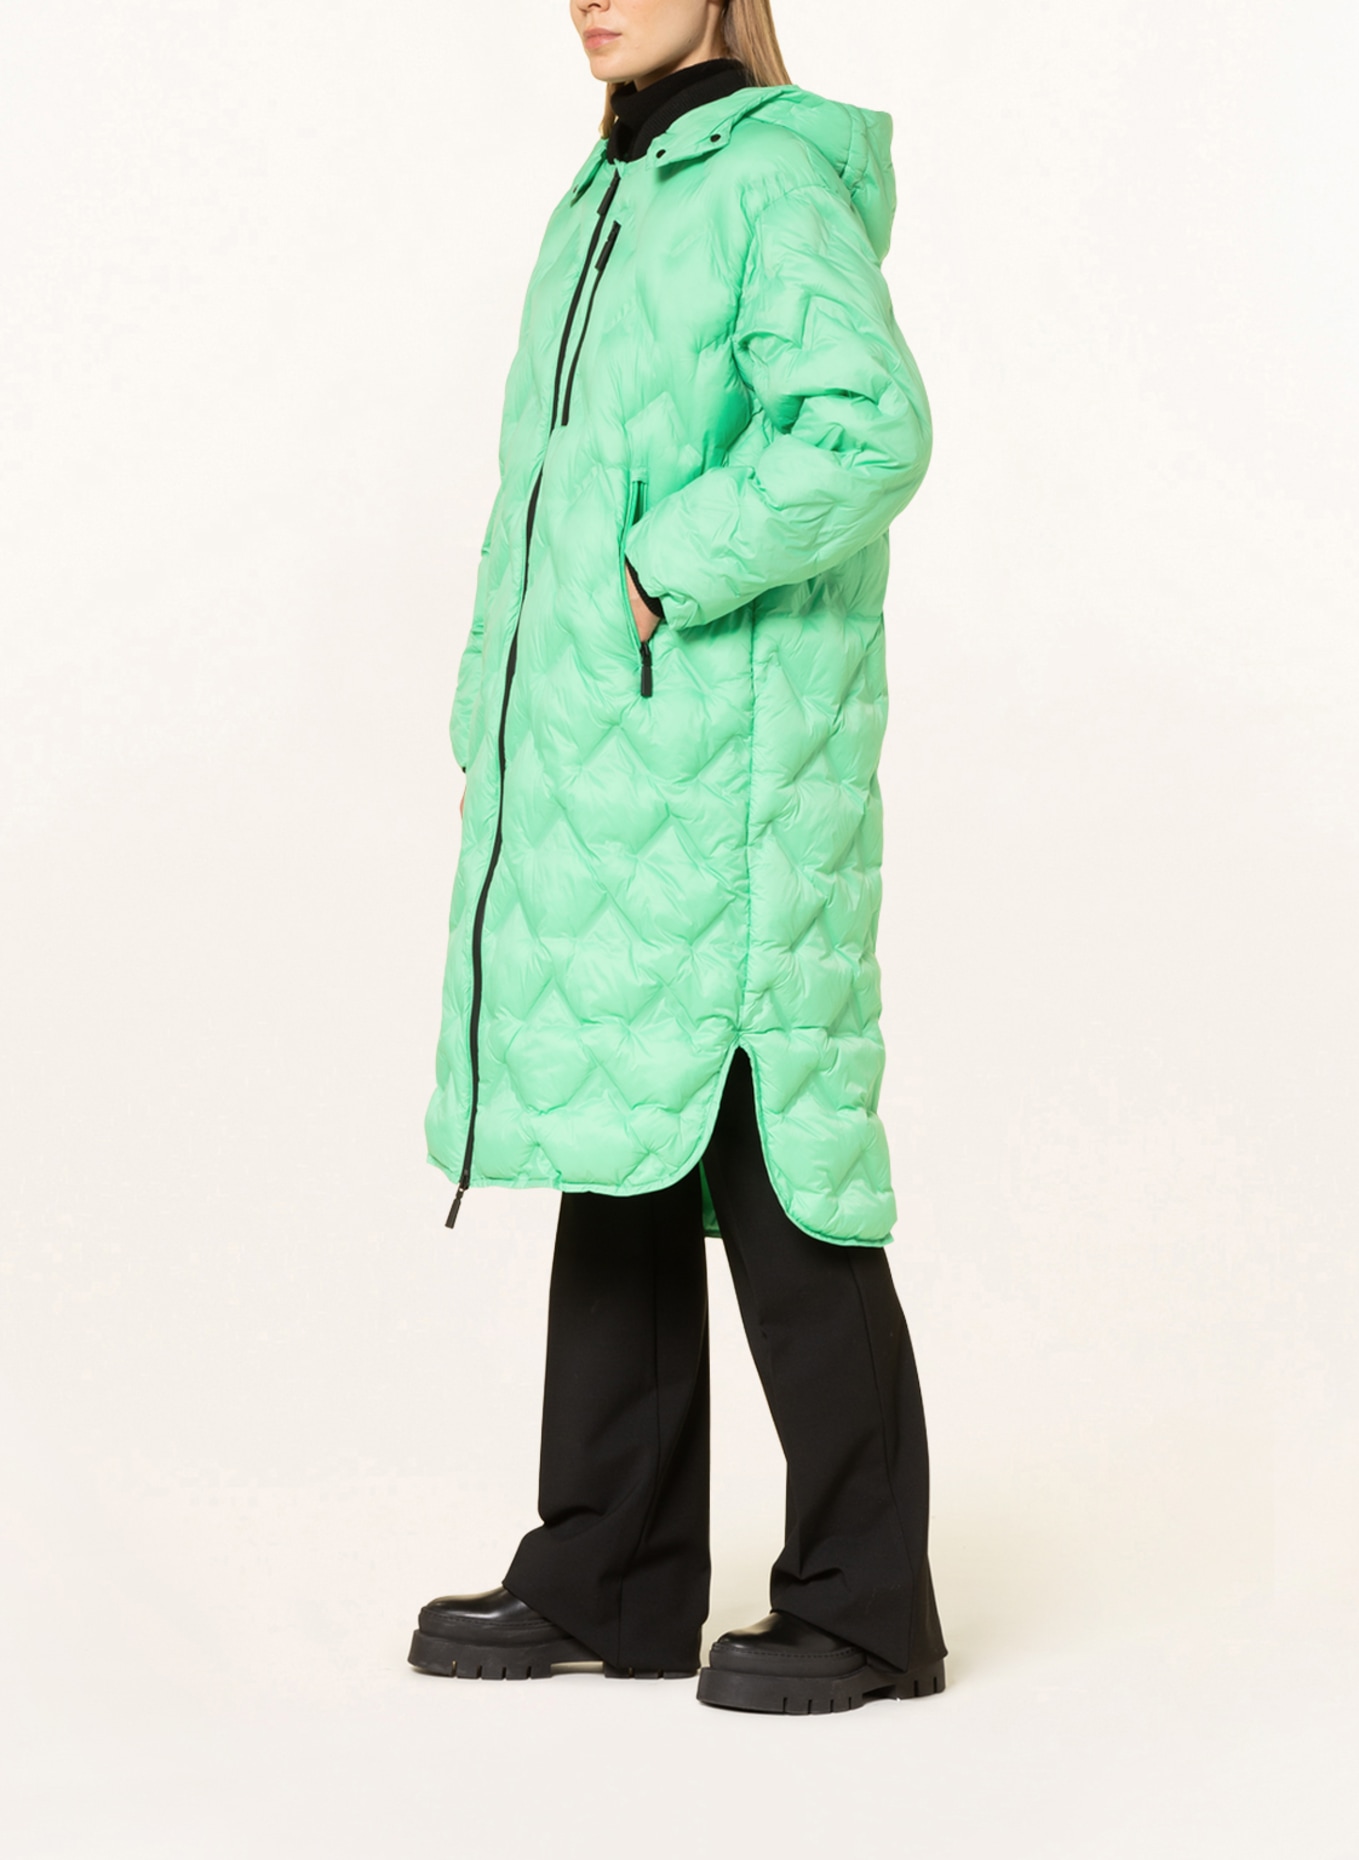 hood BRAX FRANZY Quilted light with detachable green coat in